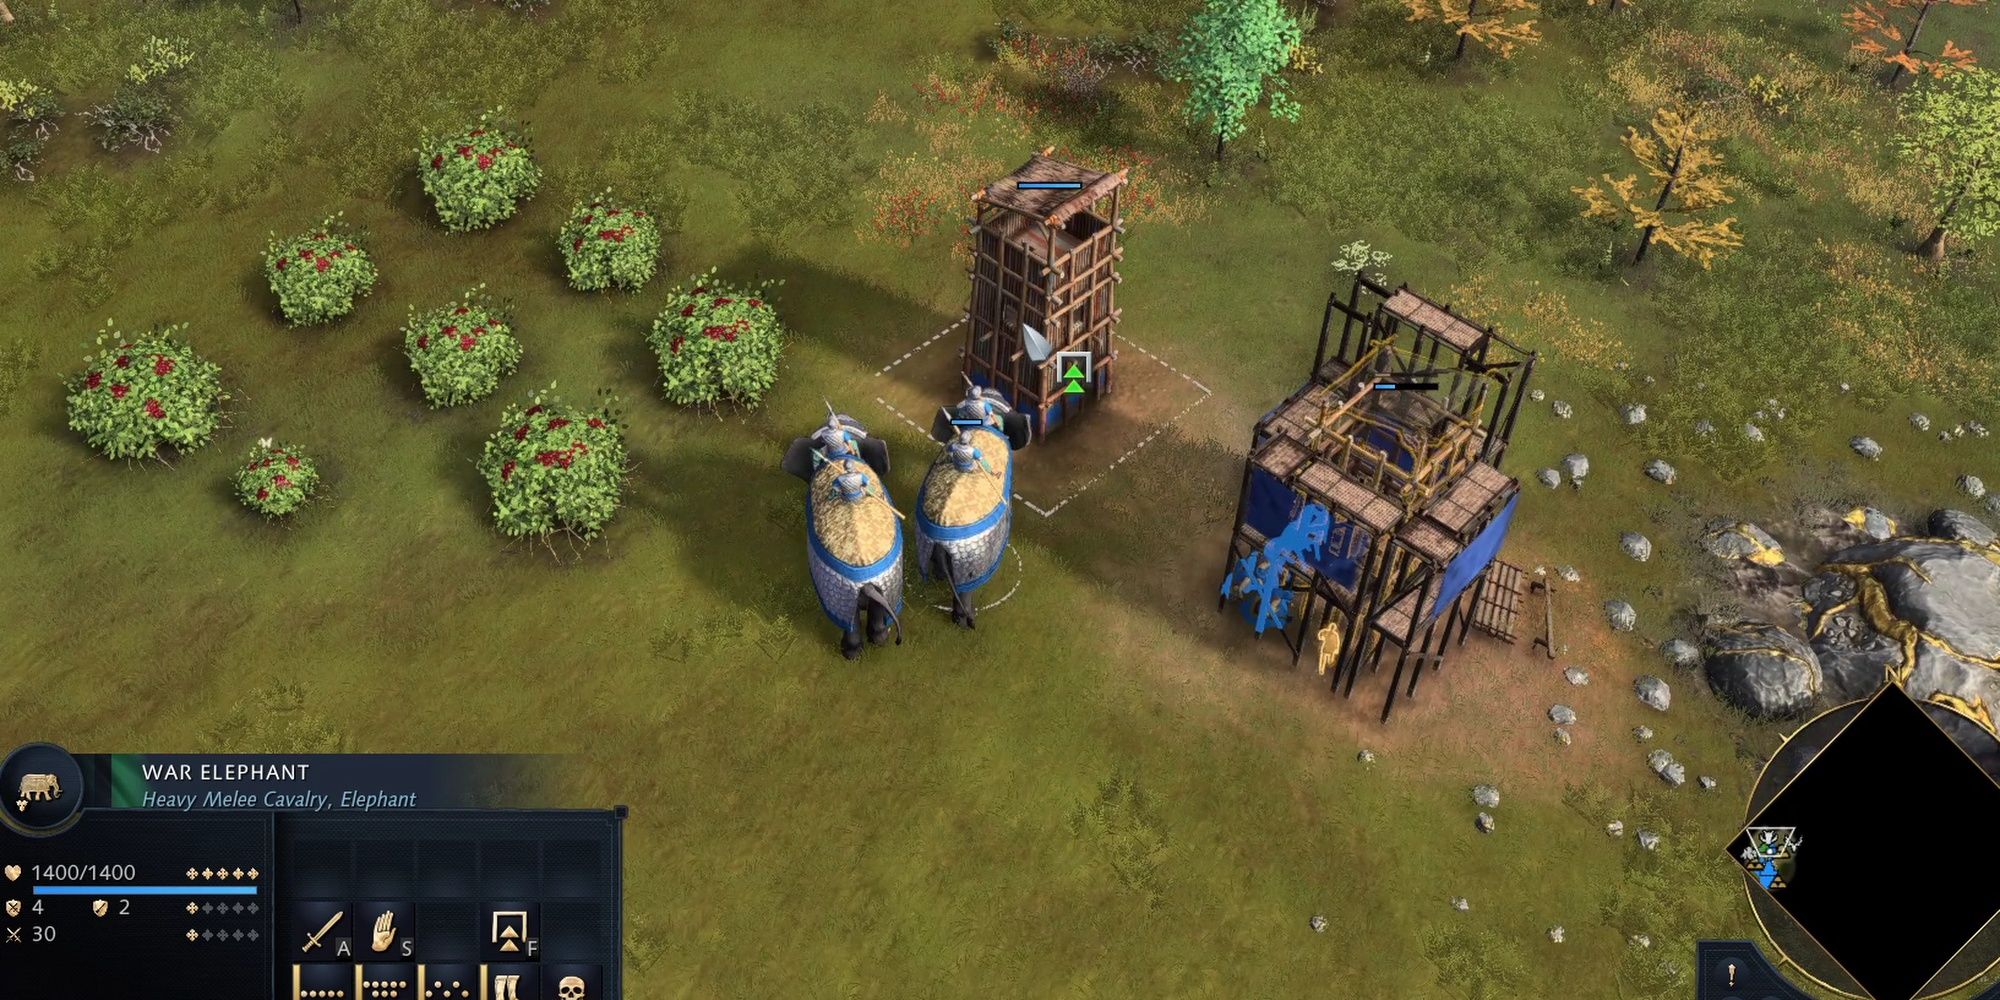 Age Of Empires IV: War Elephants Being Hidden In Tiny Outpost Tower